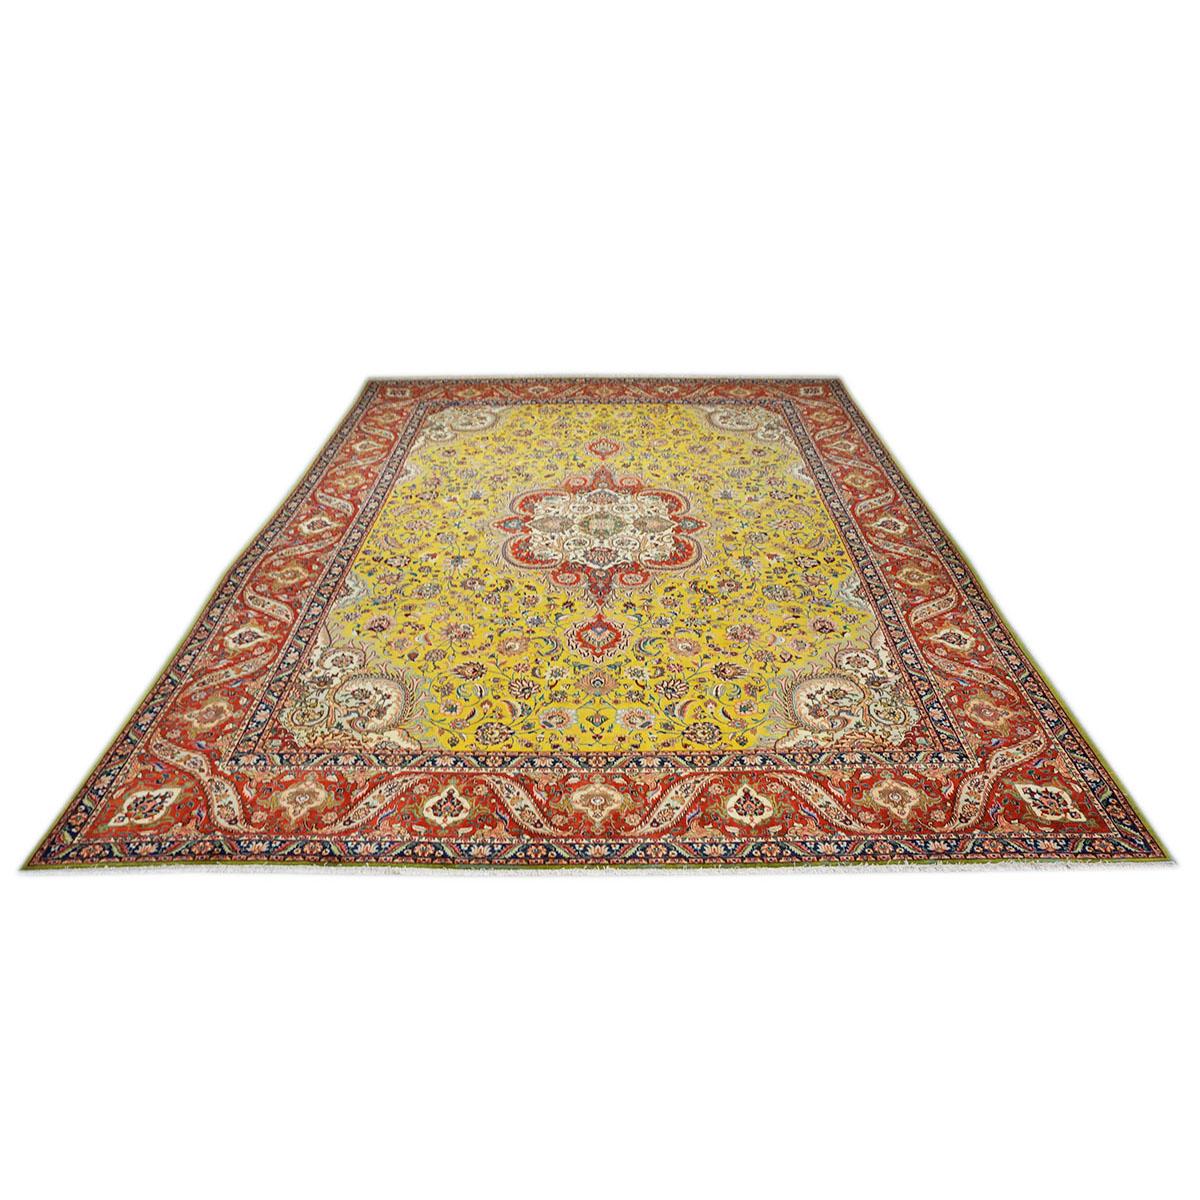  Ashly Fine Rugs presents a 1930s Antique Persian Pahlavi Tabriz 9x13 Wool Handmade Rug. Tabriz is a northern city in modern-day Iran and has forever been famous for the fineness and craftsmanship of its handmade rugs. These rugs are better known as